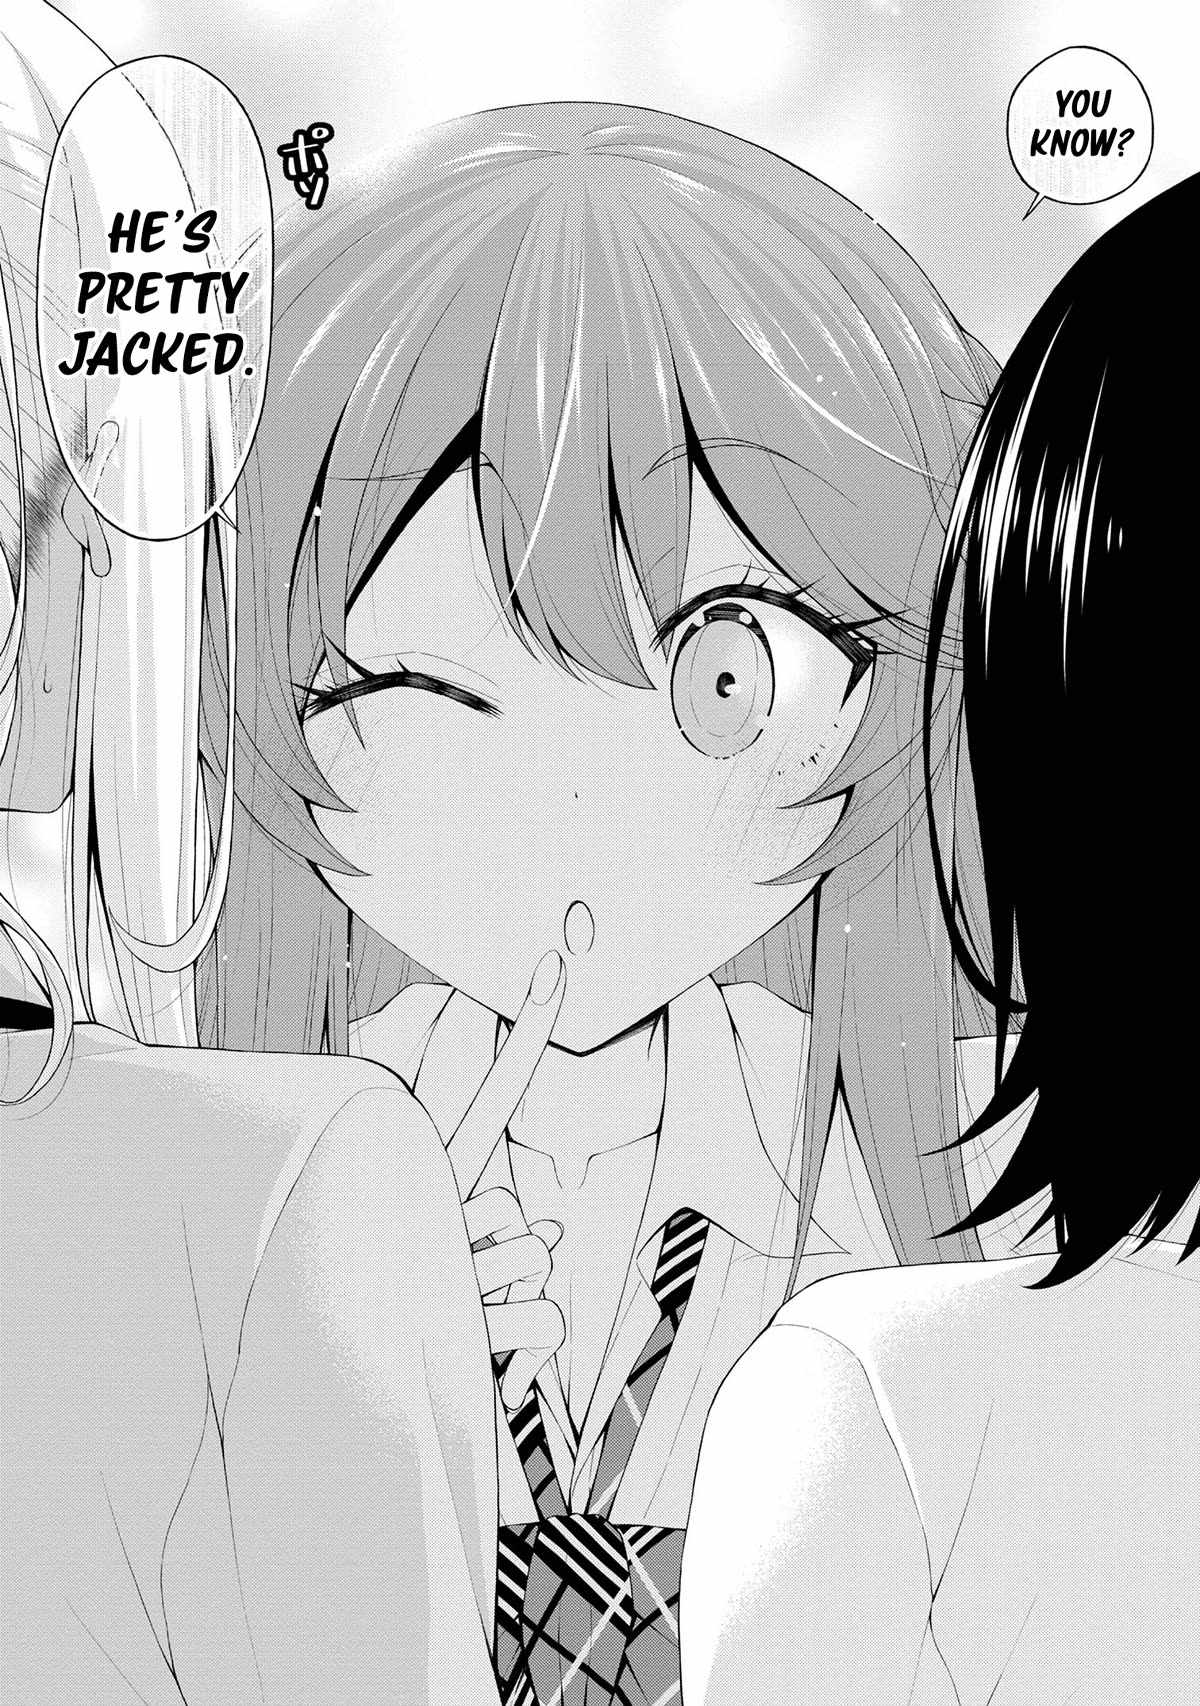 The Gal Who Was Meant to Confess to Me as a Game Punishment Has Apparently Fallen in Love with Me Chapter 13-eng-li - Page 9